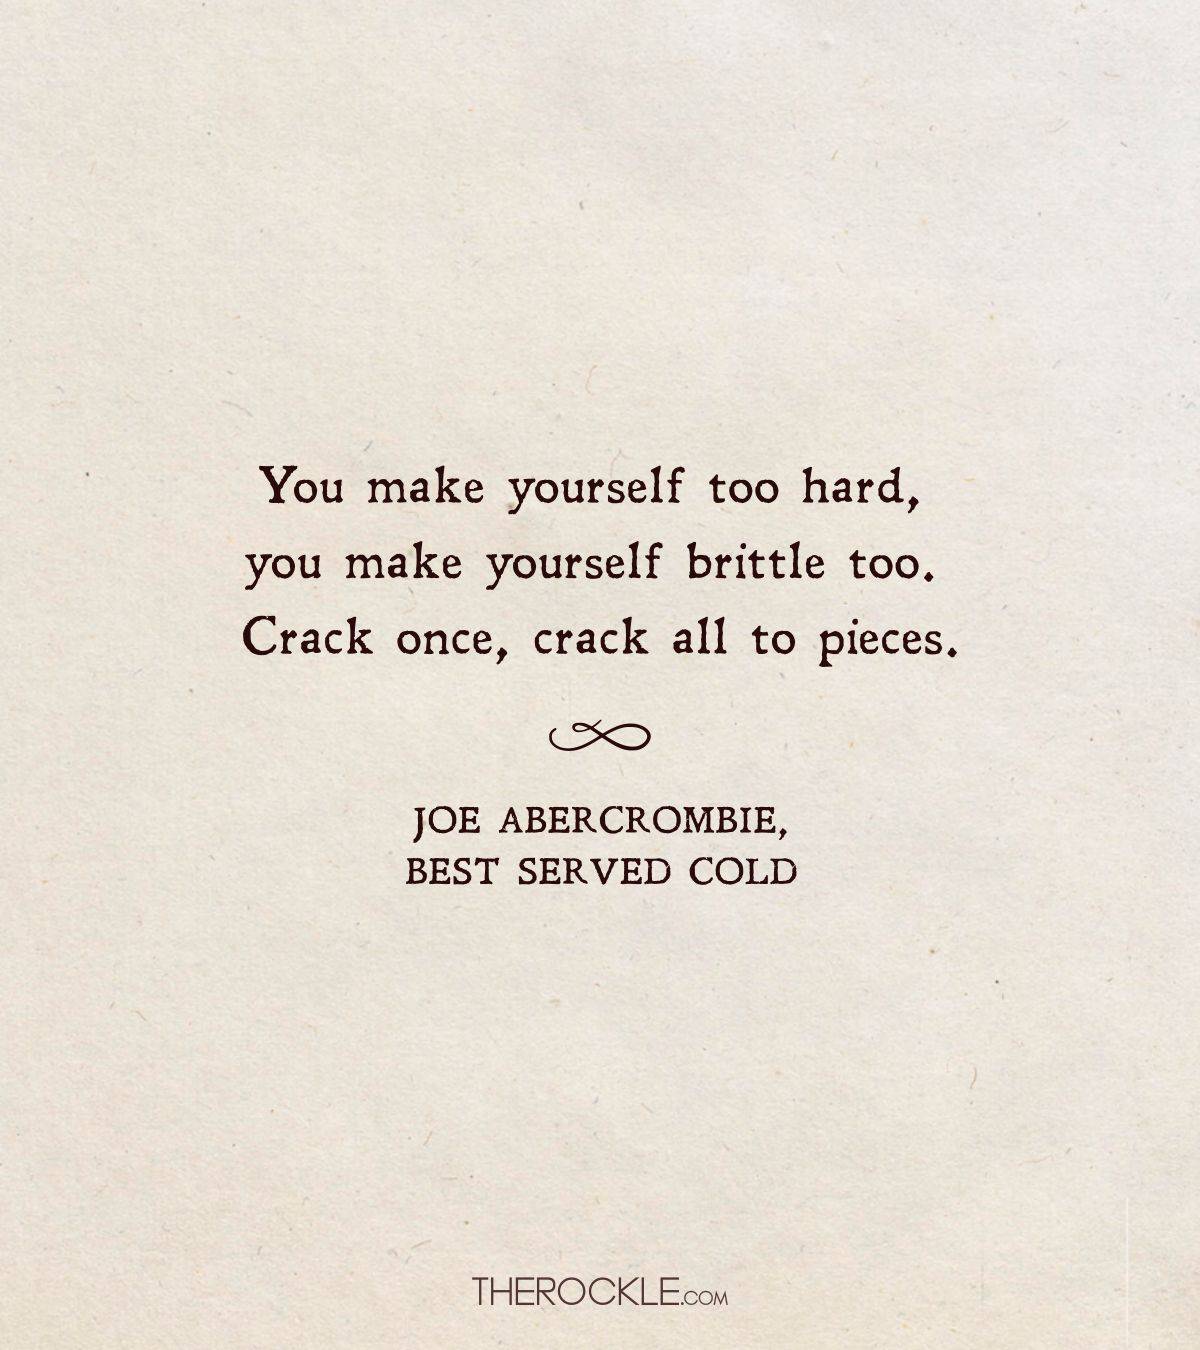 Abercrombie's quote on self-preservation